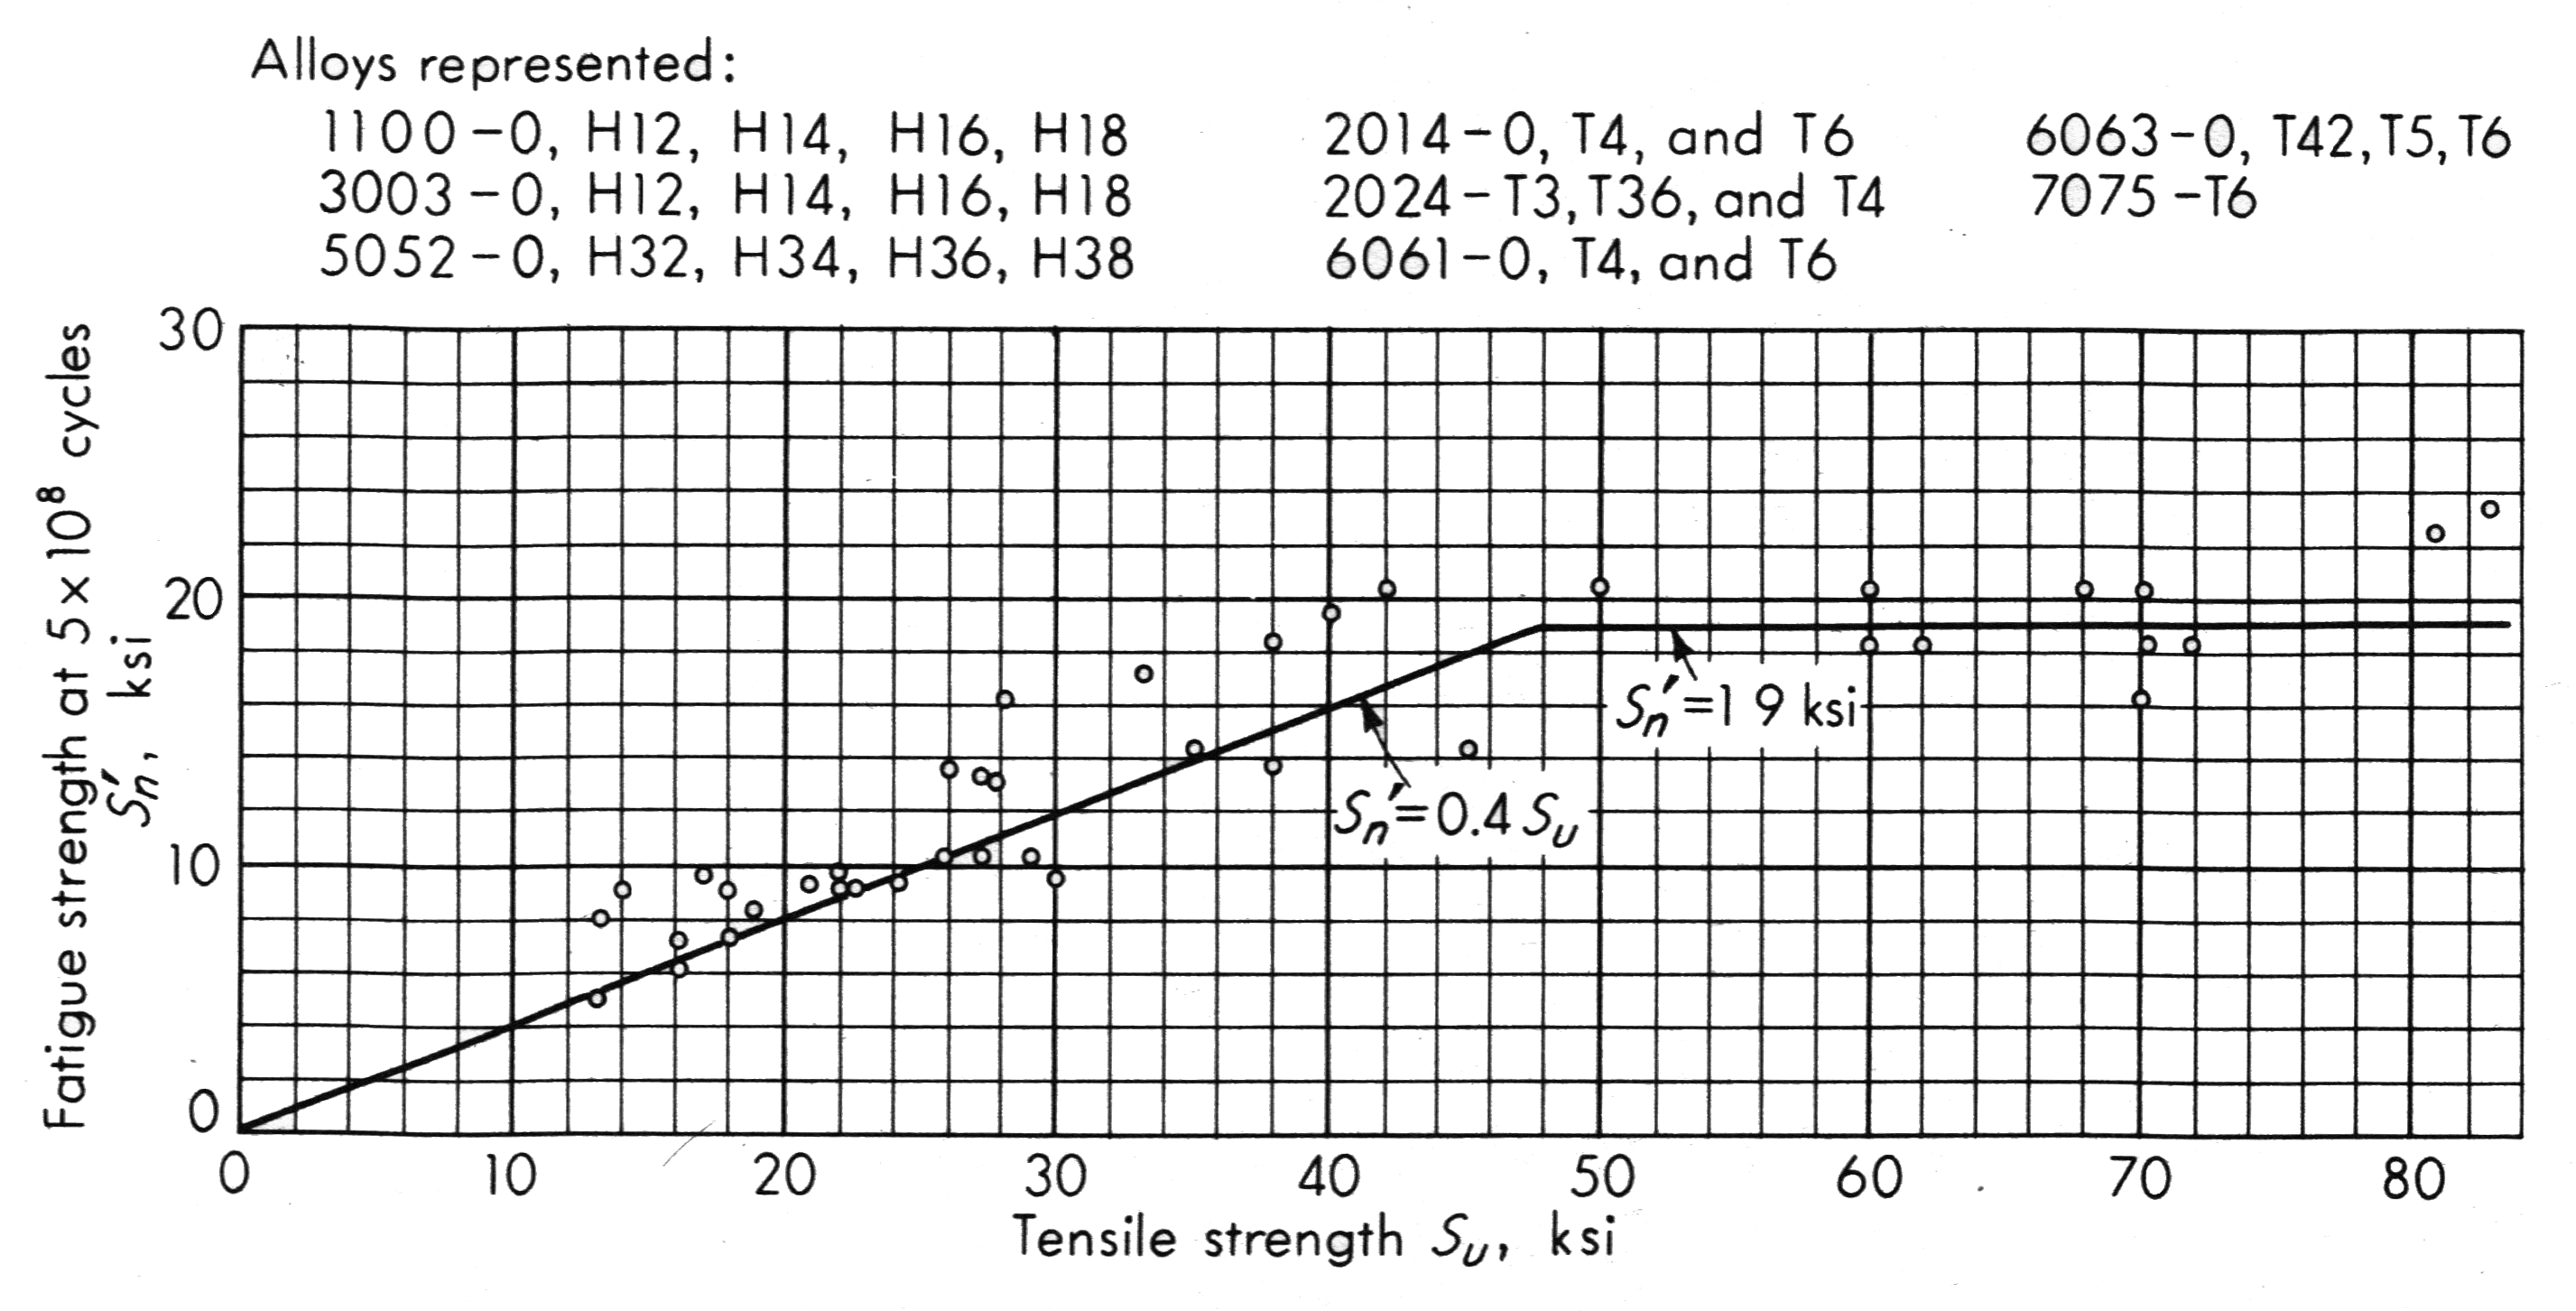  Graph - Effect of tensile strength on fatigue strength for common wrought aluminum alloys